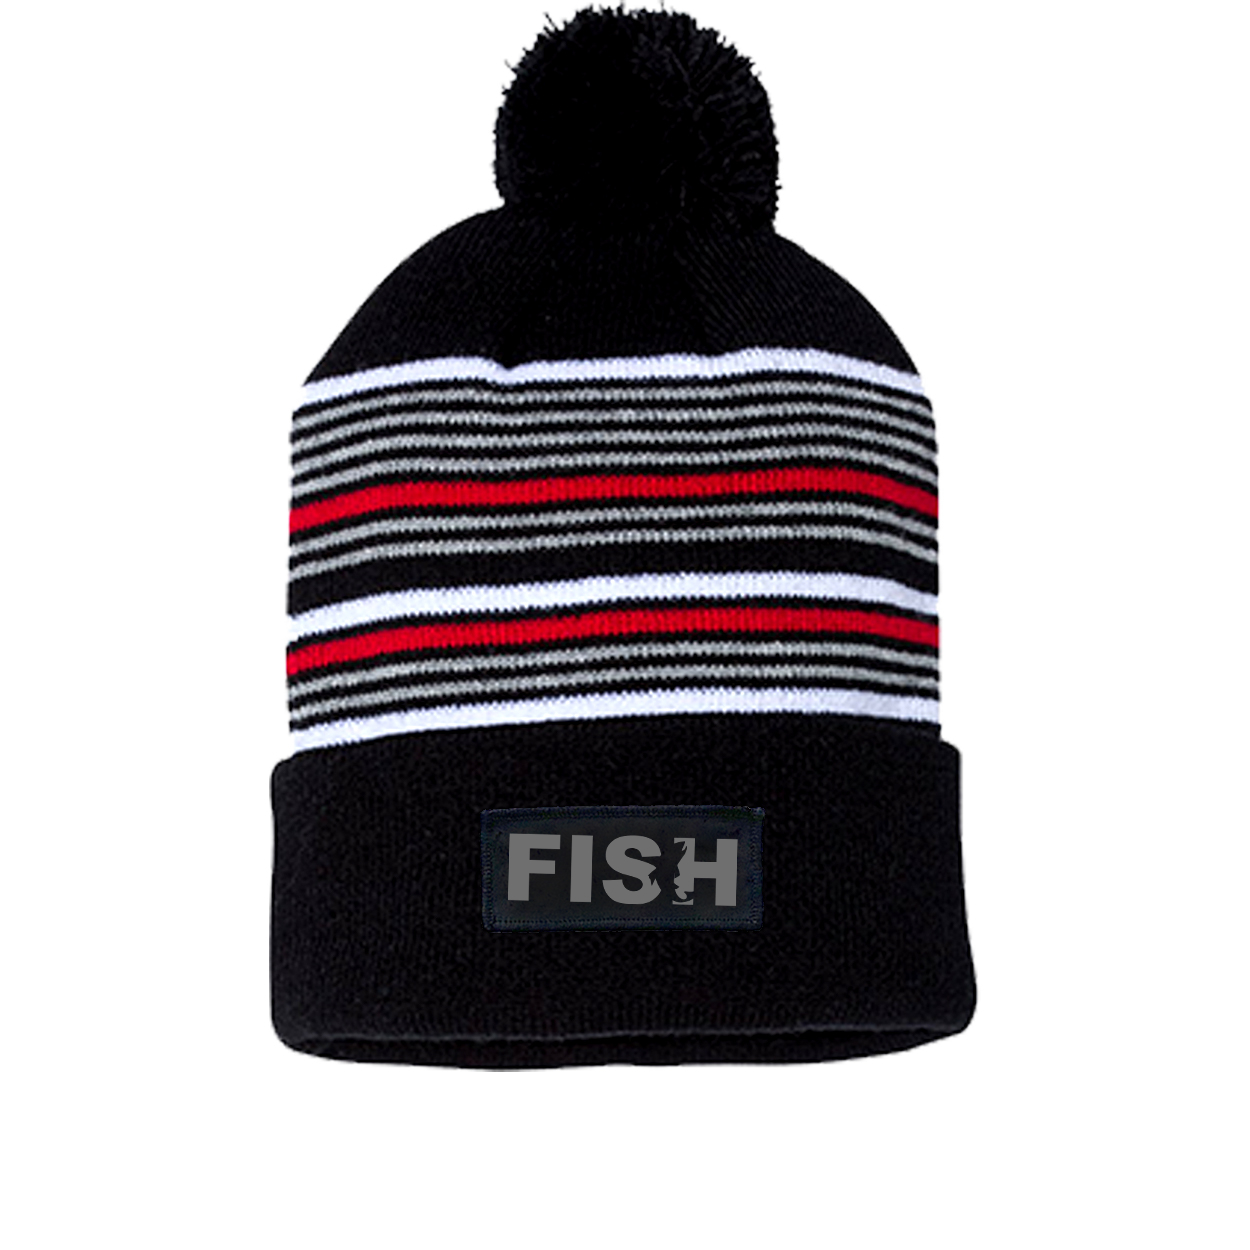 Fish Catch Logo Night Out Woven Patch Roll Up Pom Knit Beanie Black/ White/ Grey/ Red Beanie (Gray Logo)